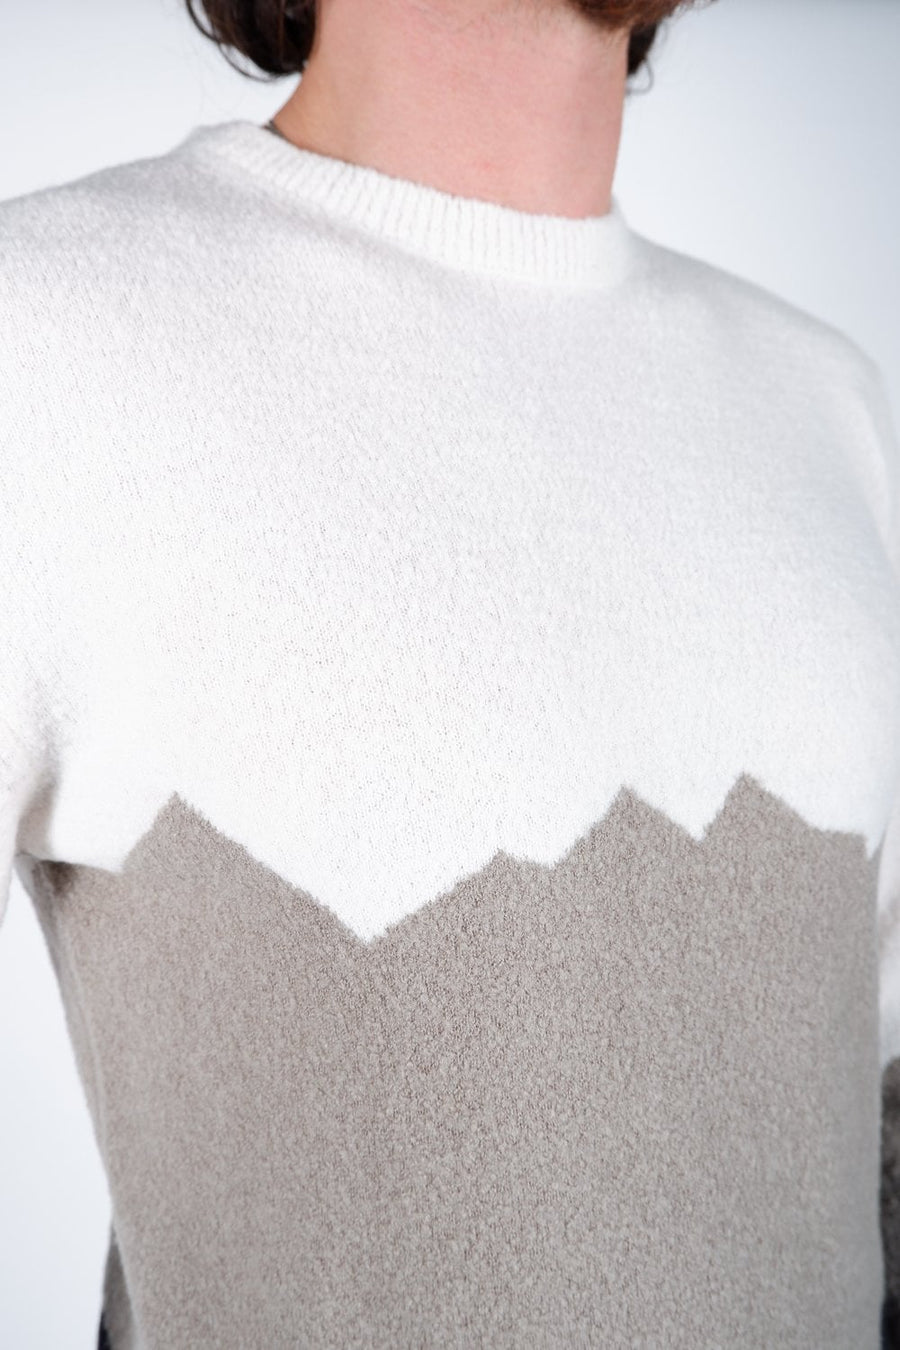 Buy the Daniele Fiesoli Peak Design Knitted Jumper in White/Black at Intro. Spend £50 for free UK delivery. Official stockists. We ship worldwide.